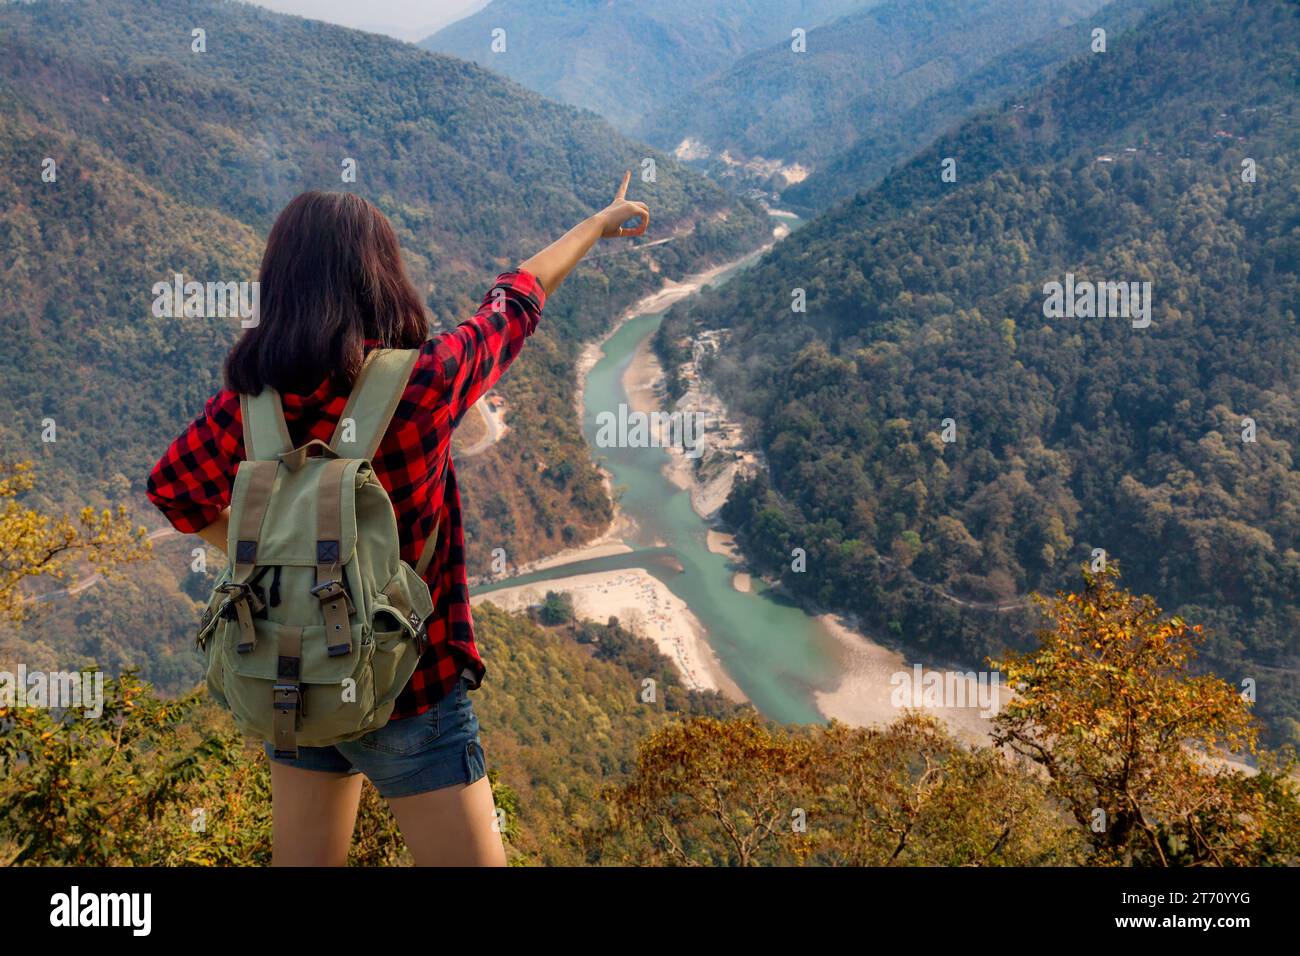 Young girl tourist enjoys a scenic aerial view of Teesta river and Himalayan landscape from Lover's Point at Darjeeling, India. Stock Photo